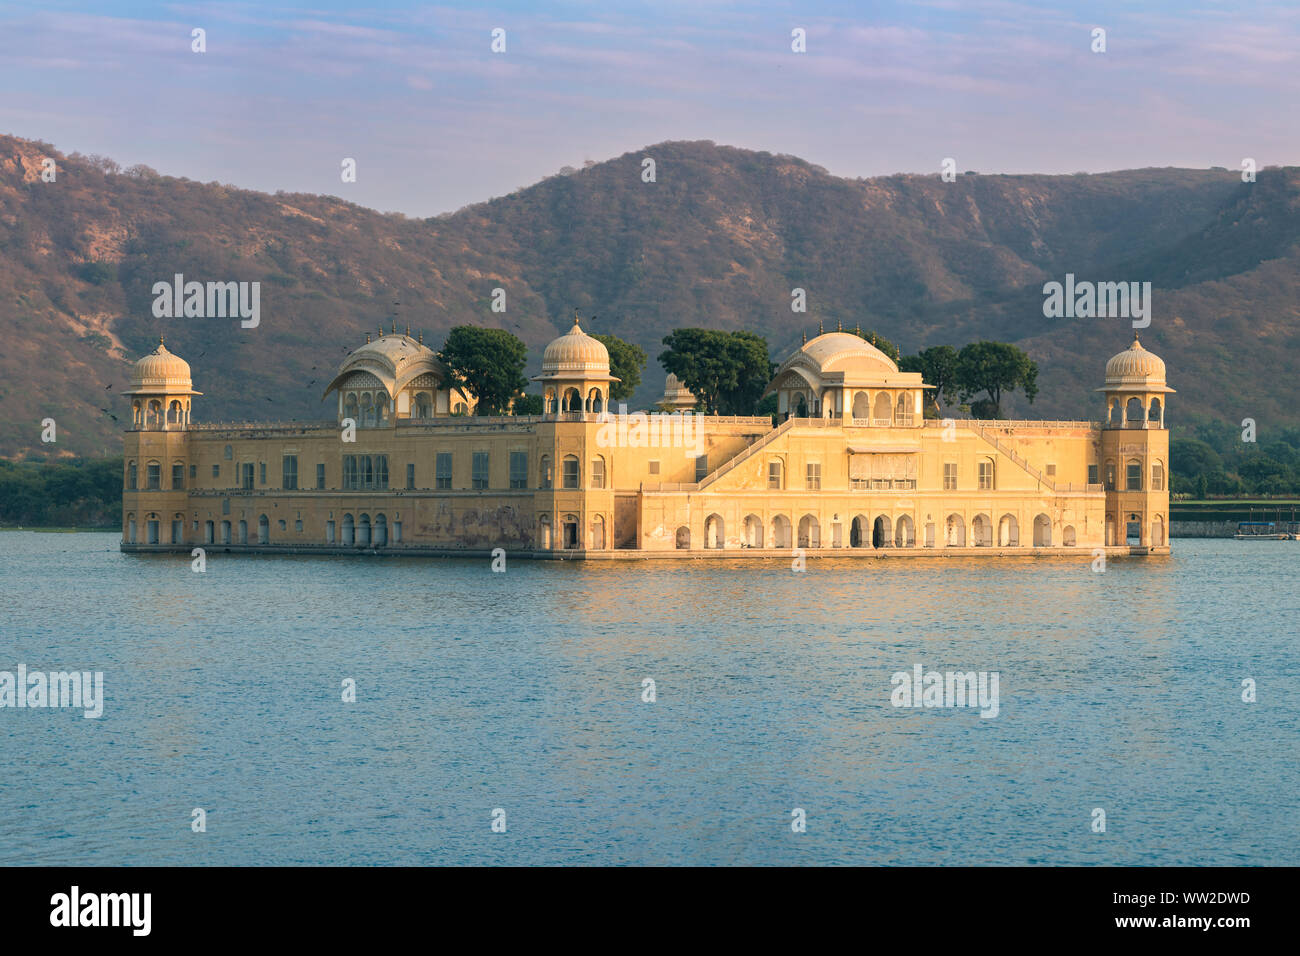 The palace Jal Mahal at night. Jal Mahal (Water Palace) was built during the 18th century in the middle of Man Sager Lake. Jaipur, Rajasthan, India, Stock Photo